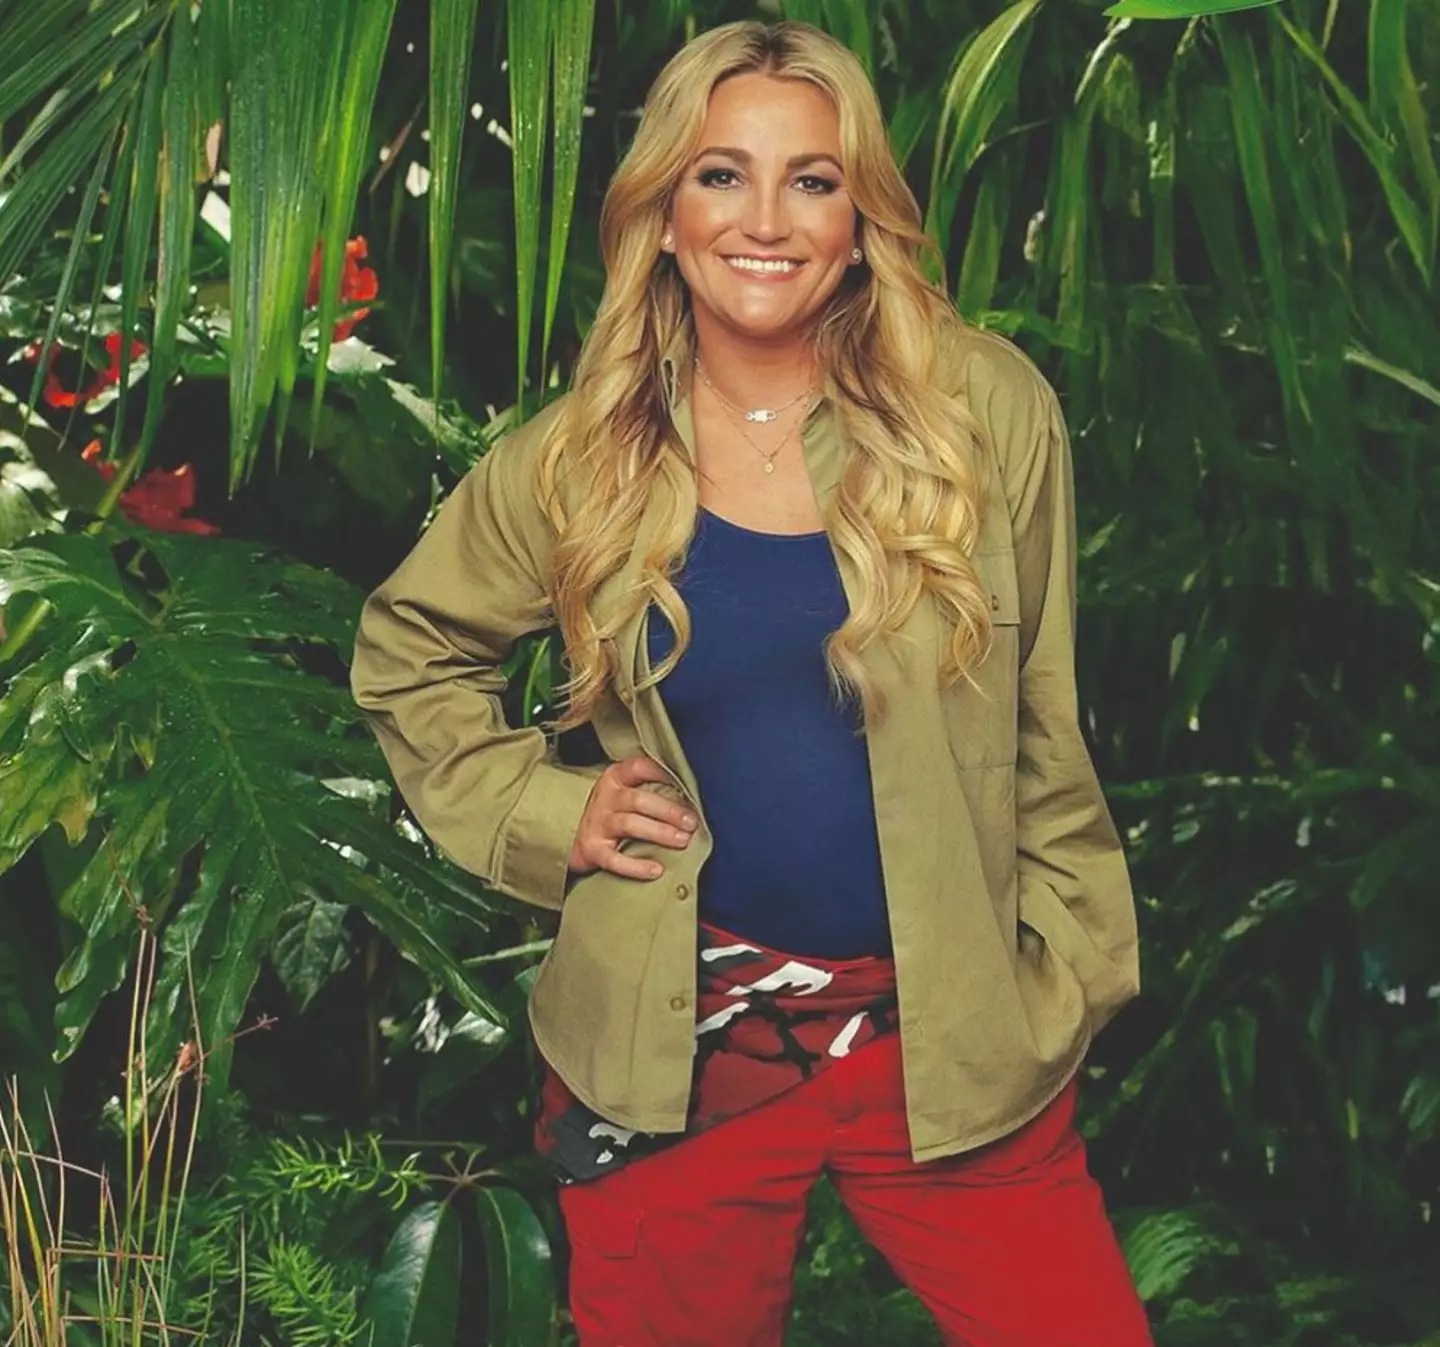 Jamie Lynn Spears has broken her silence following her exit from I'm A Celeb.